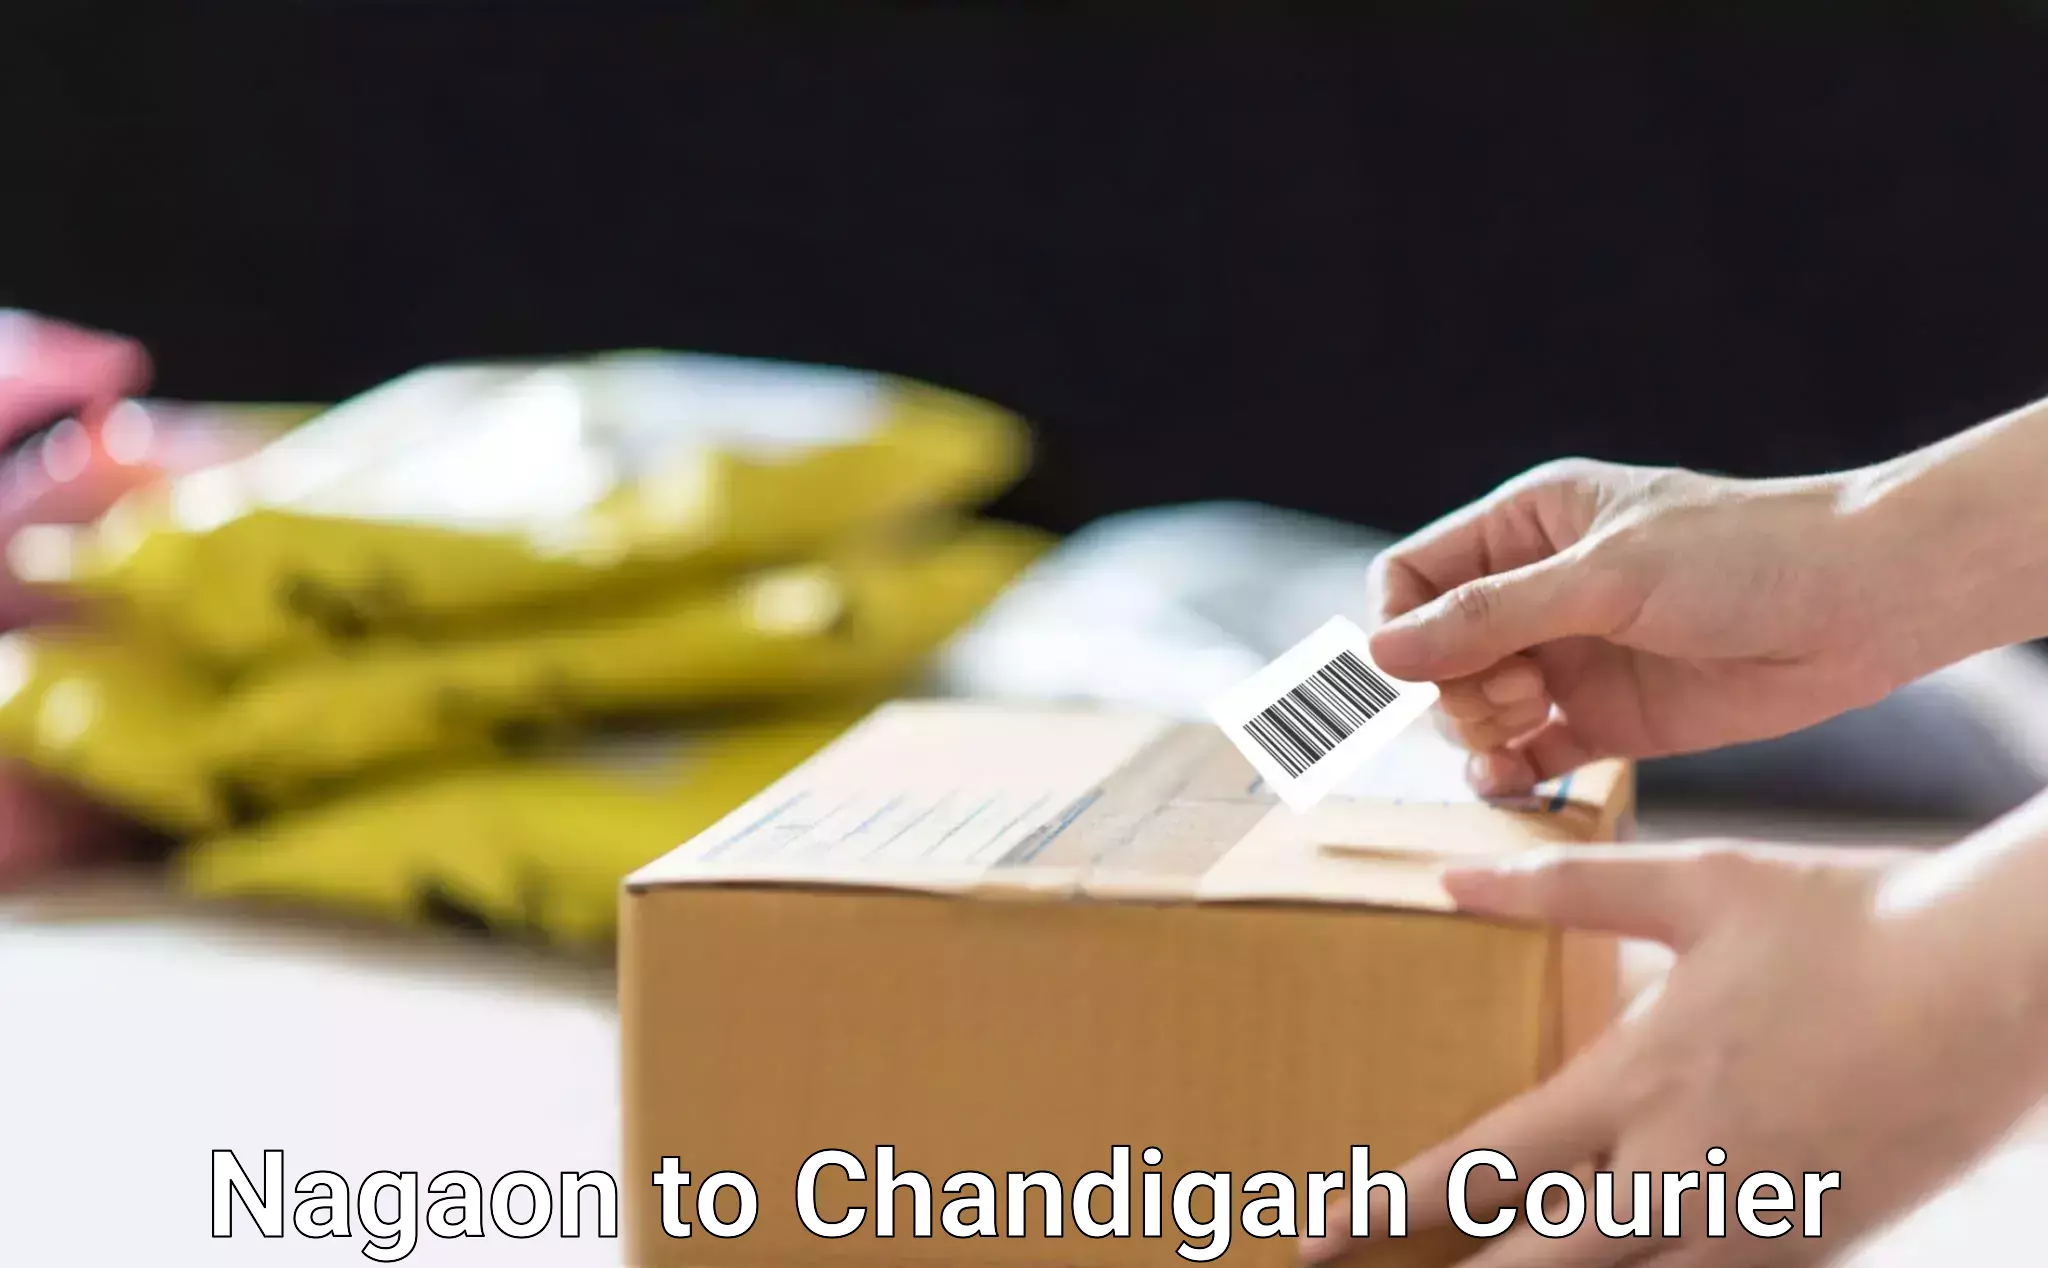 Multi-service courier options Nagaon to Chandigarh